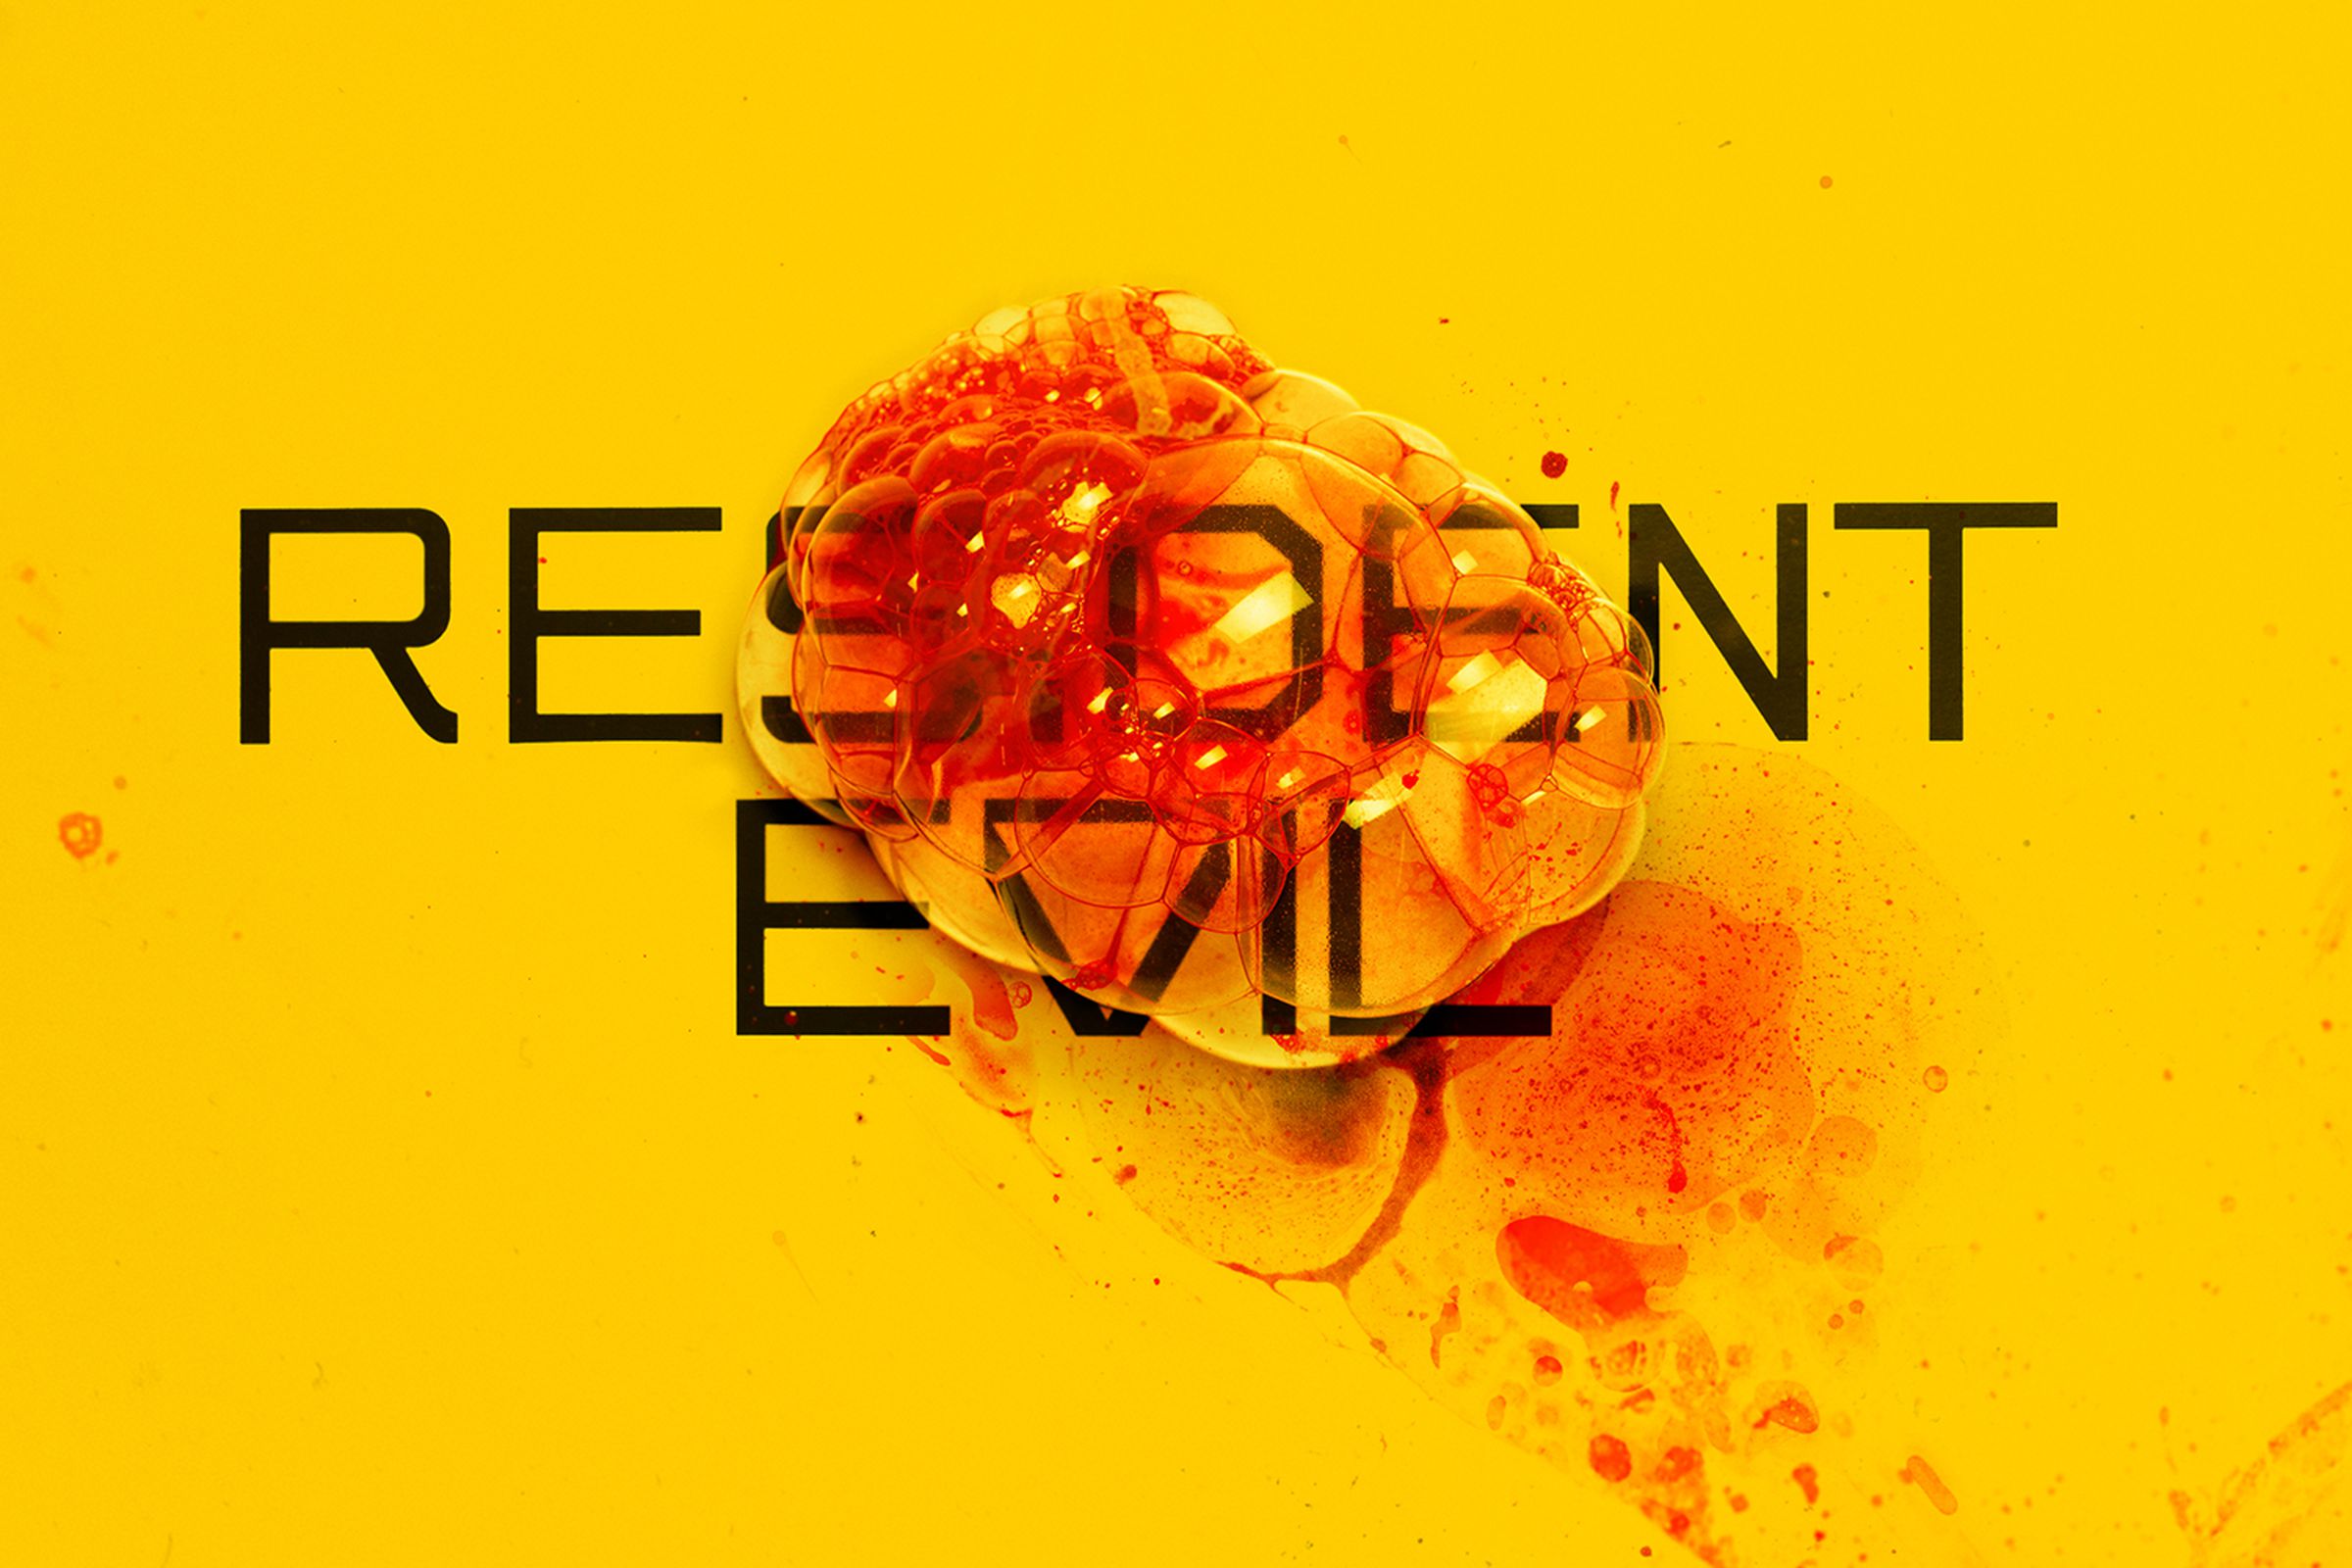 The new Resident Evil series comes to Netflix in July